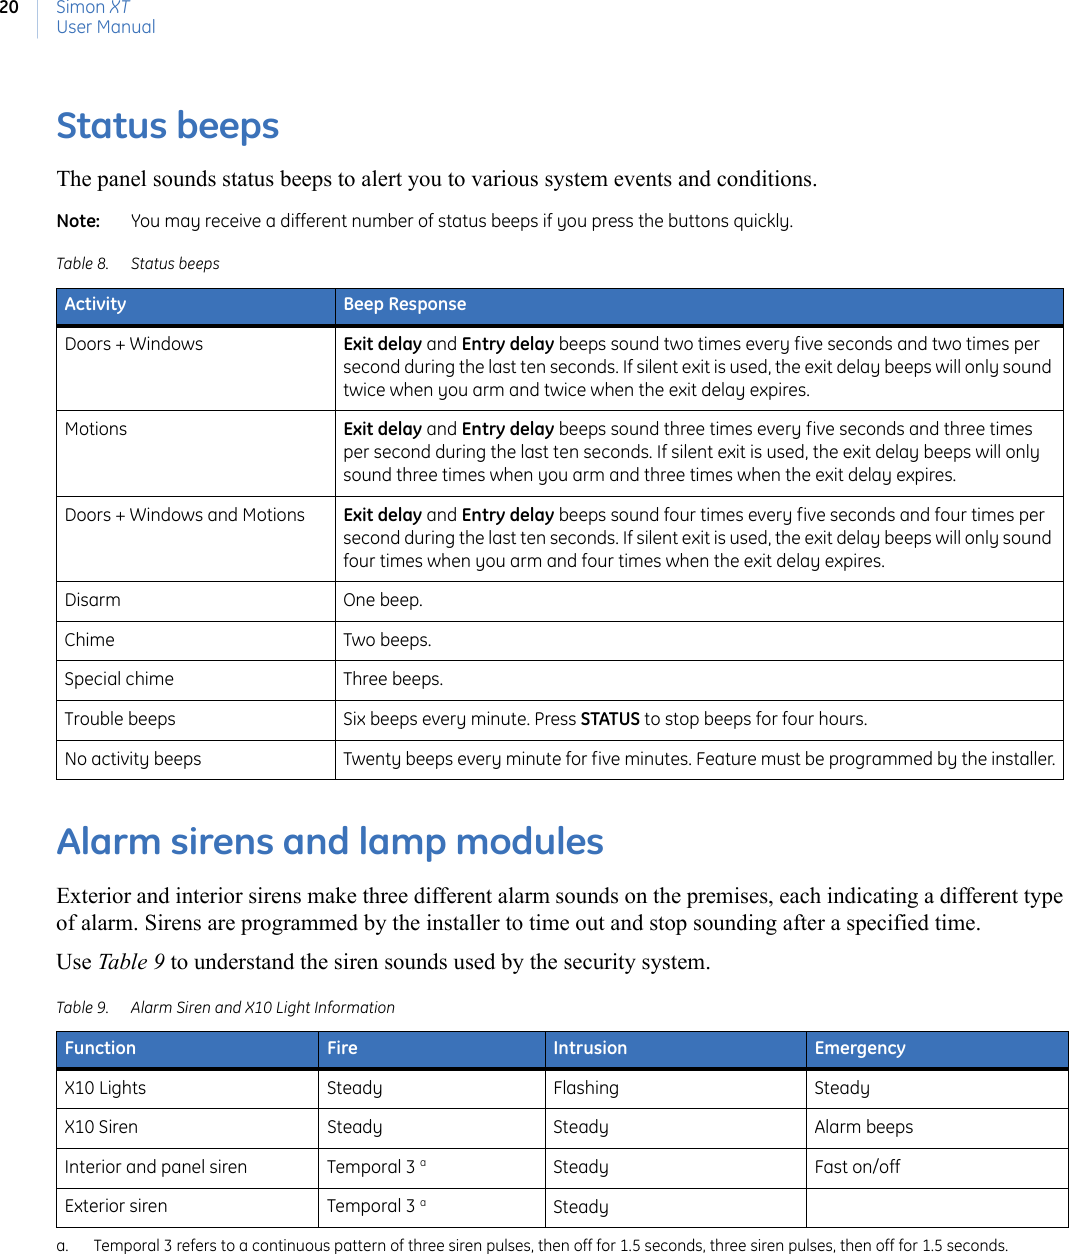 Simon XTUser Manual20Status beepsThe panel sounds status beeps to alert you to various system events and conditions.Note:   You may receive a different number of status beeps if you press the buttons quickly.Alarm sirens and lamp modulesExterior and interior sirens make three different alarm sounds on the premises, each indicating a different type of alarm. Sirens are programmed by the installer to time out and stop sounding after a specified time.Use Table 9 to understand the siren sounds used by the security system.Table 8. Status beepsActivity Beep ResponseDoors + Windows Exit delay and Entry delay beeps sound two times every five seconds and two times per second during the last ten seconds. If silent exit is used, the exit delay beeps will only sound twice when you arm and twice when the exit delay expires.Motions Exit delay and Entry delay beeps sound three times every five seconds and three times per second during the last ten seconds. If silent exit is used, the exit delay beeps will only sound three times when you arm and three times when the exit delay expires.Doors + Windows and Motions Exit delay and Entry delay beeps sound four times every five seconds and four times per second during the last ten seconds. If silent exit is used, the exit delay beeps will only sound four times when you arm and four times when the exit delay expires.Disarm One beep.Chime Two beeps.Special chime Three beeps.Trouble beeps Six beeps every minute. Press STATUS to stop beeps for four hours.No activity beeps Twenty beeps every minute for five minutes. Feature must be programmed by the installer.Table 9. Alarm Siren and X10 Light InformationFunction Fire Intrusion EmergencyX10 Lights Steady Flashing SteadyX10 Siren Steady Steady Alarm beepsInterior and panel siren Temporal 3 aa. Temporal 3 refers to a continuous pattern of three siren pulses, then off for 1.5 seconds, three siren pulses, then off for 1.5 seconds.Steady Fast on/offExterior siren Temporal 3 aSteady